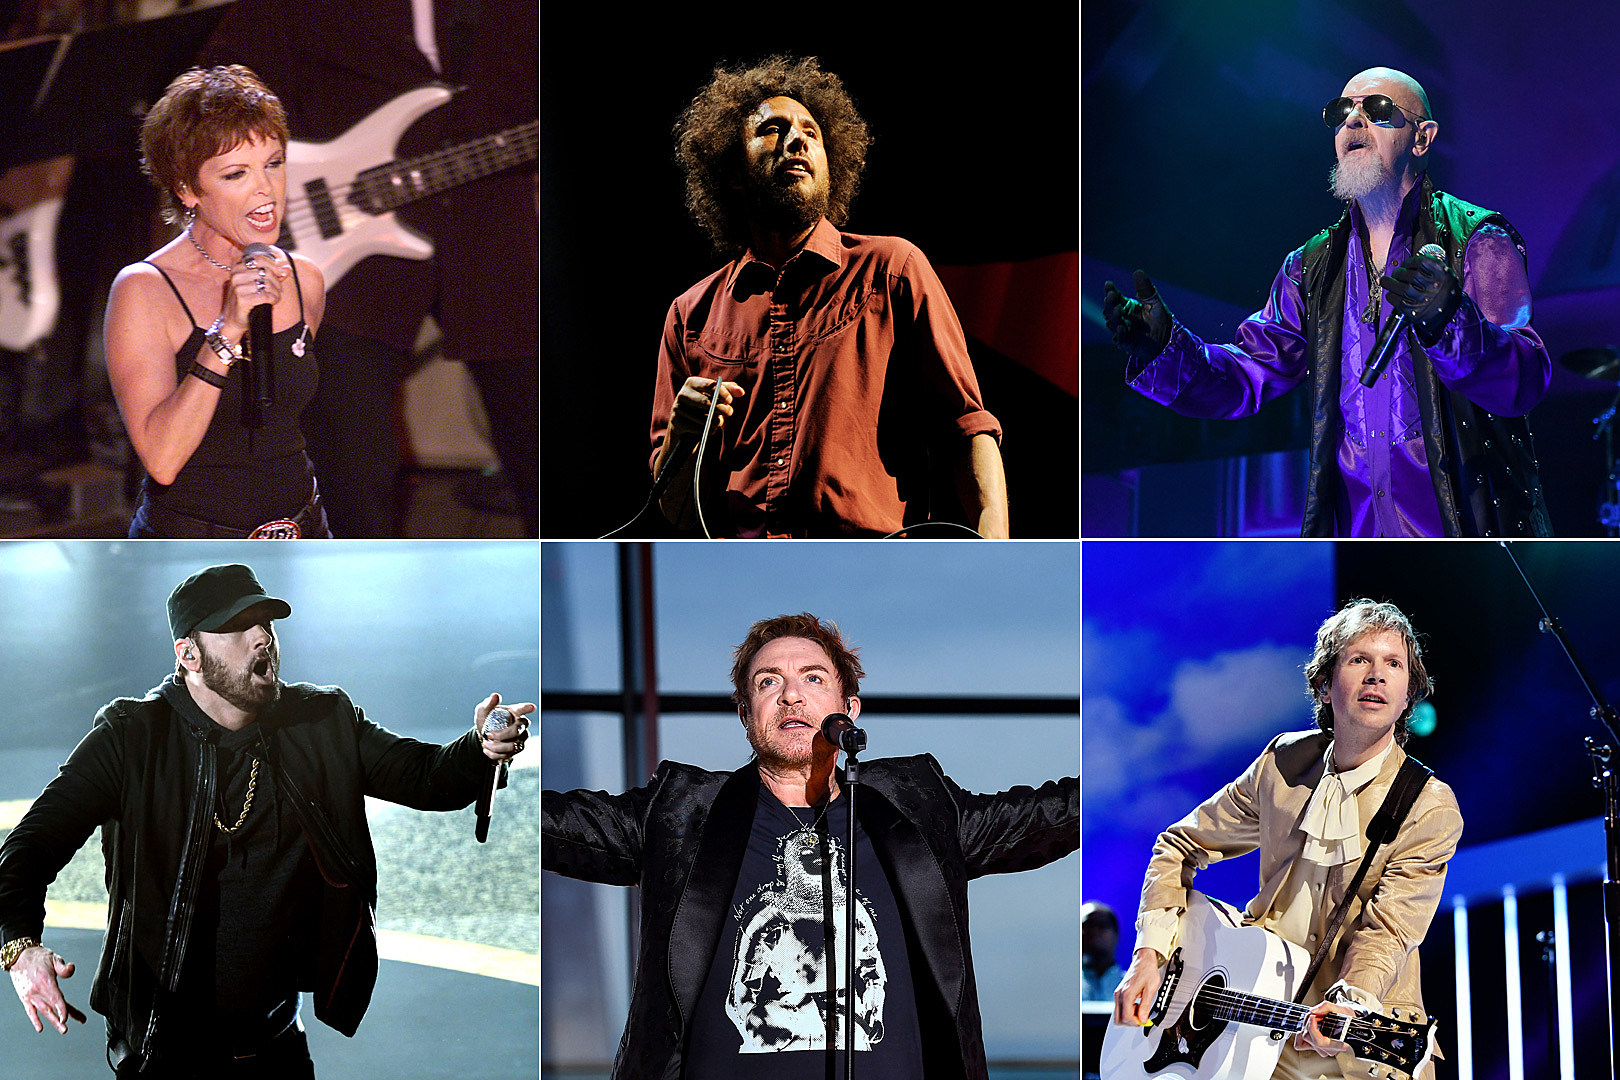 2022 Nominees  Rock & Roll Hall of Fame